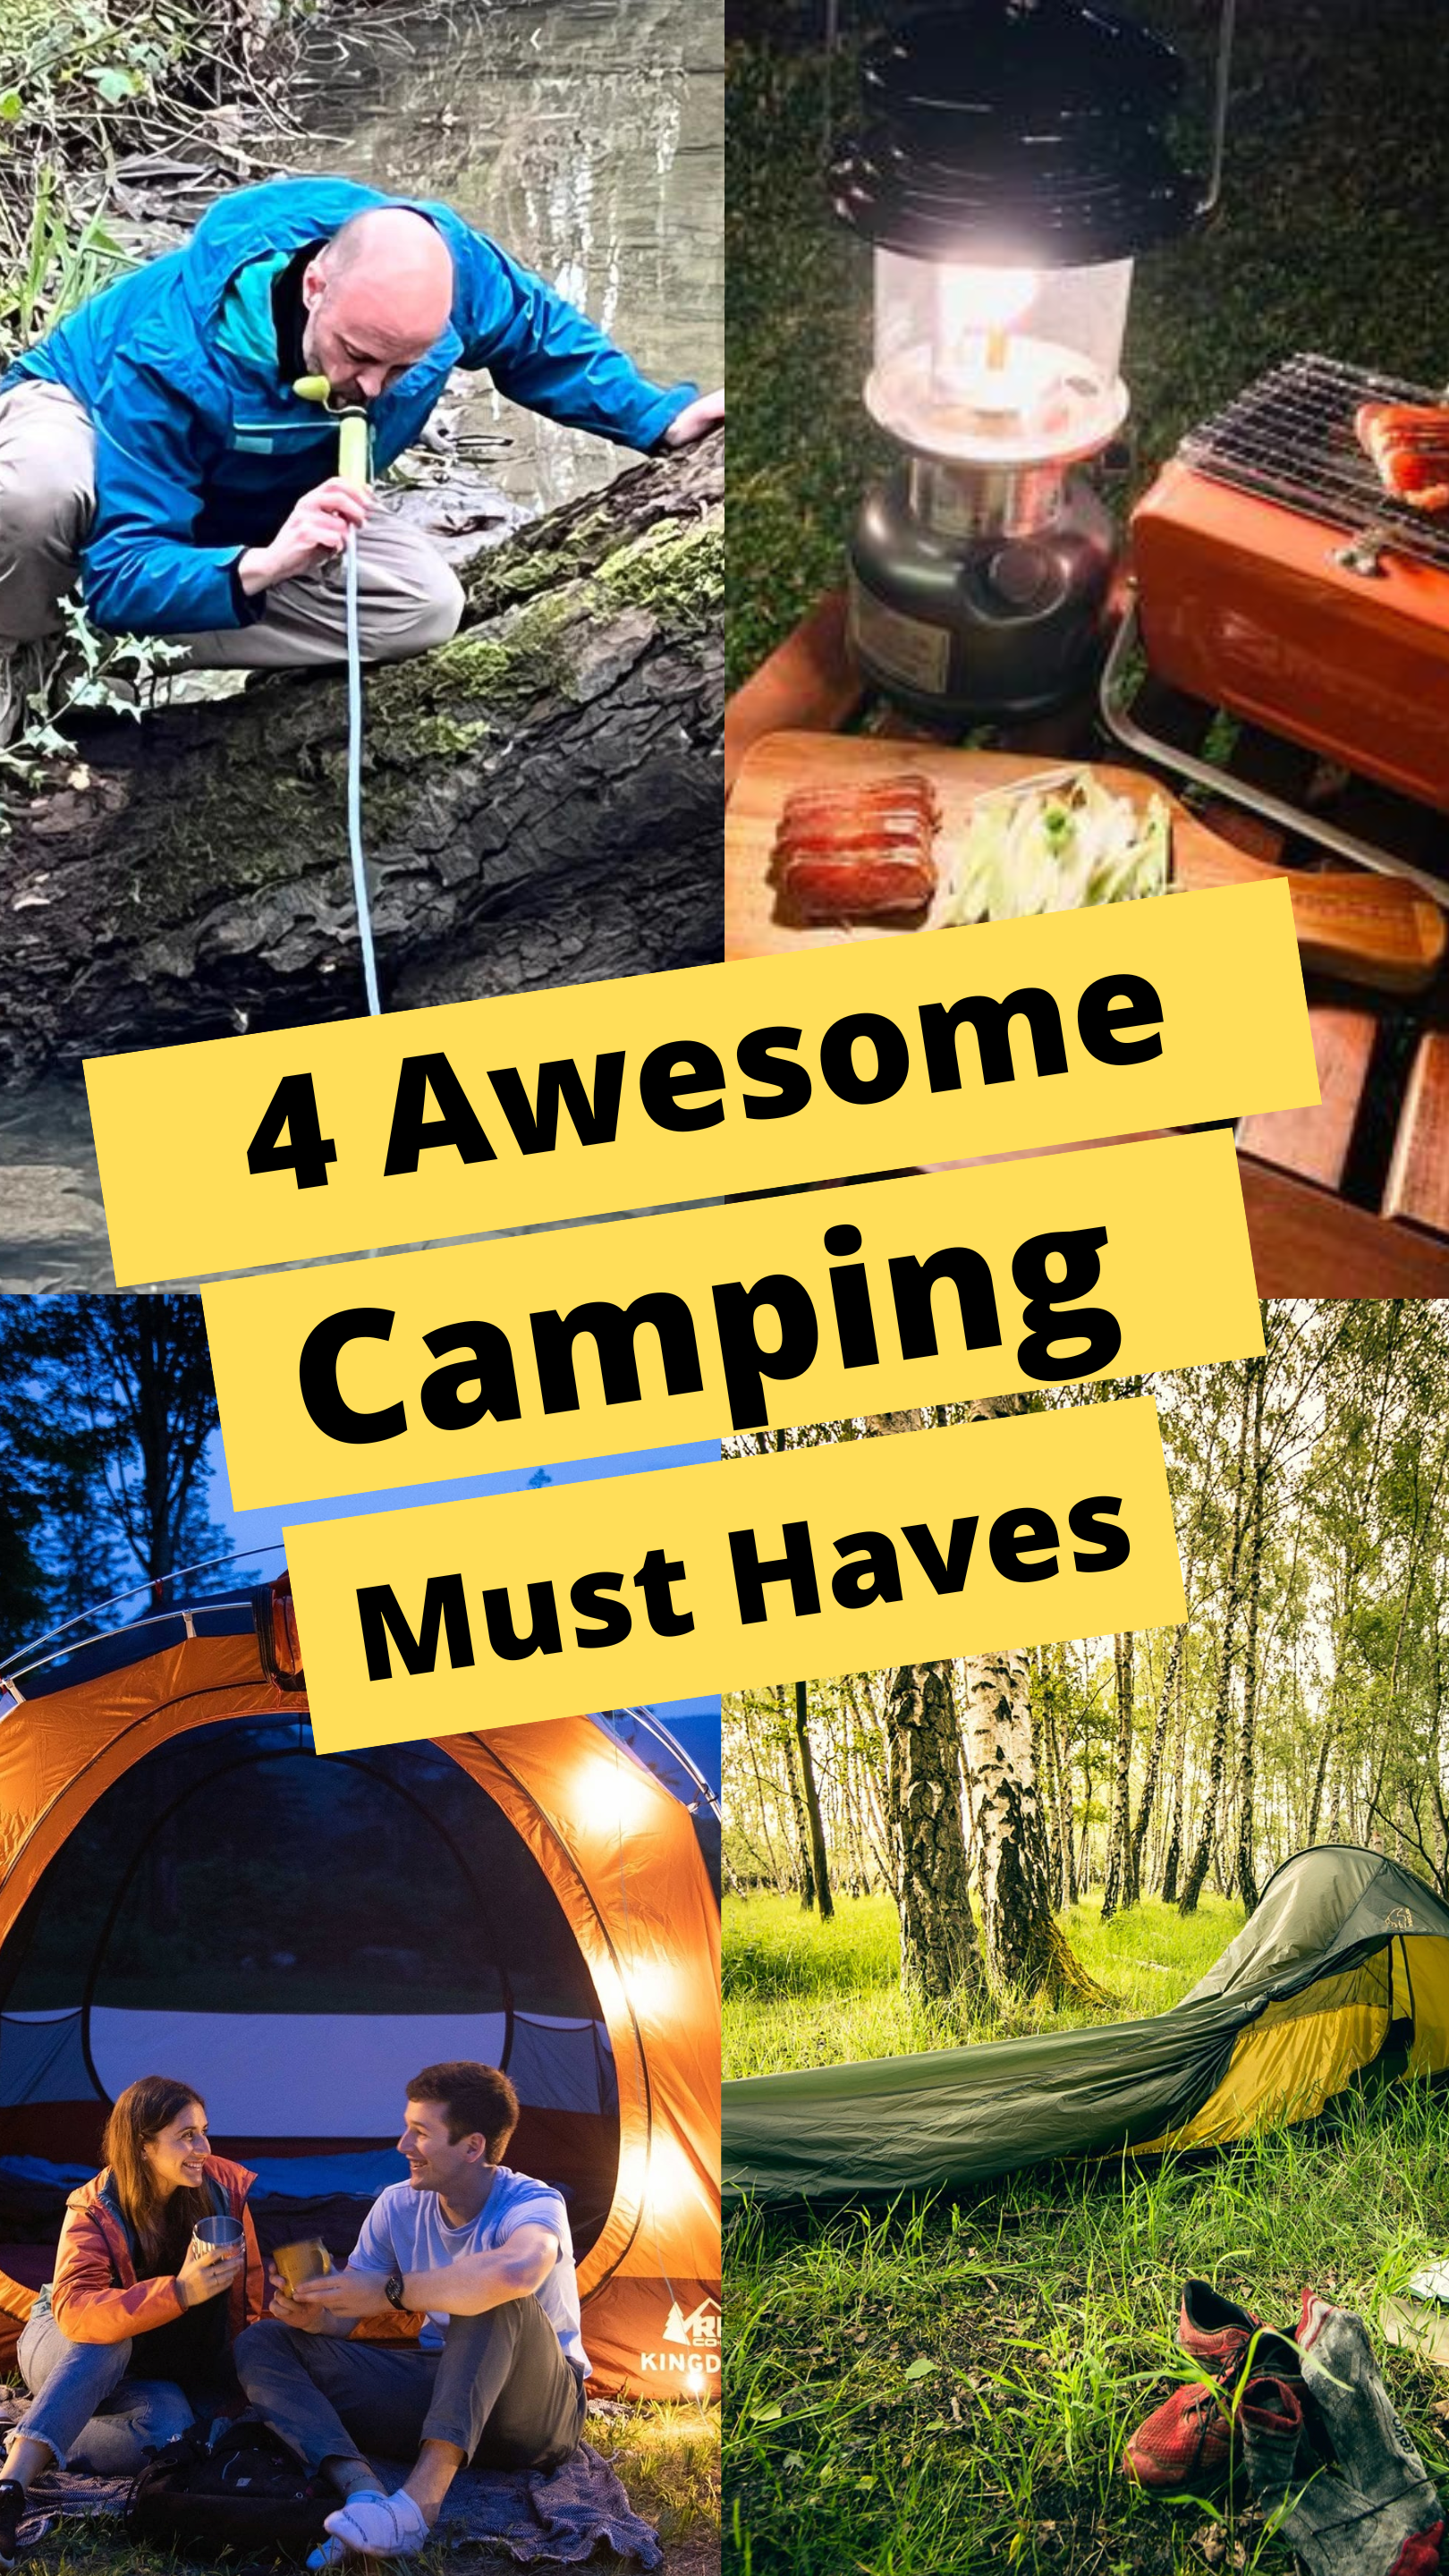 4 Awesome Camping Must Haves